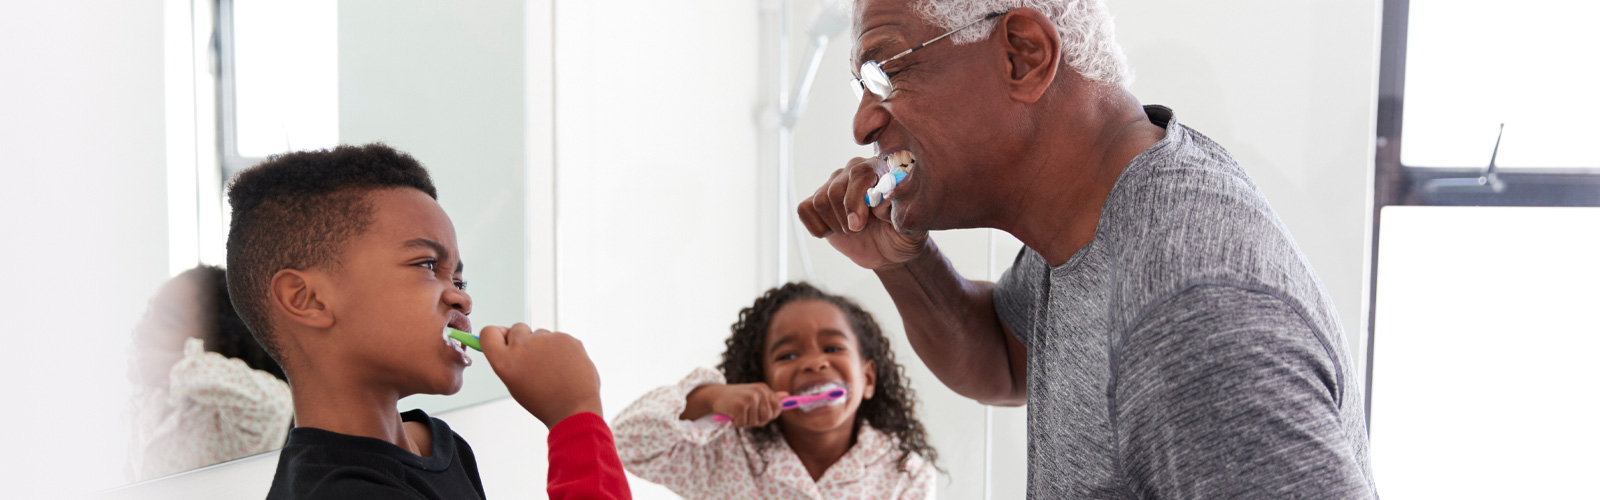 4 Steps to Adapting Dental Care to an Aging Population